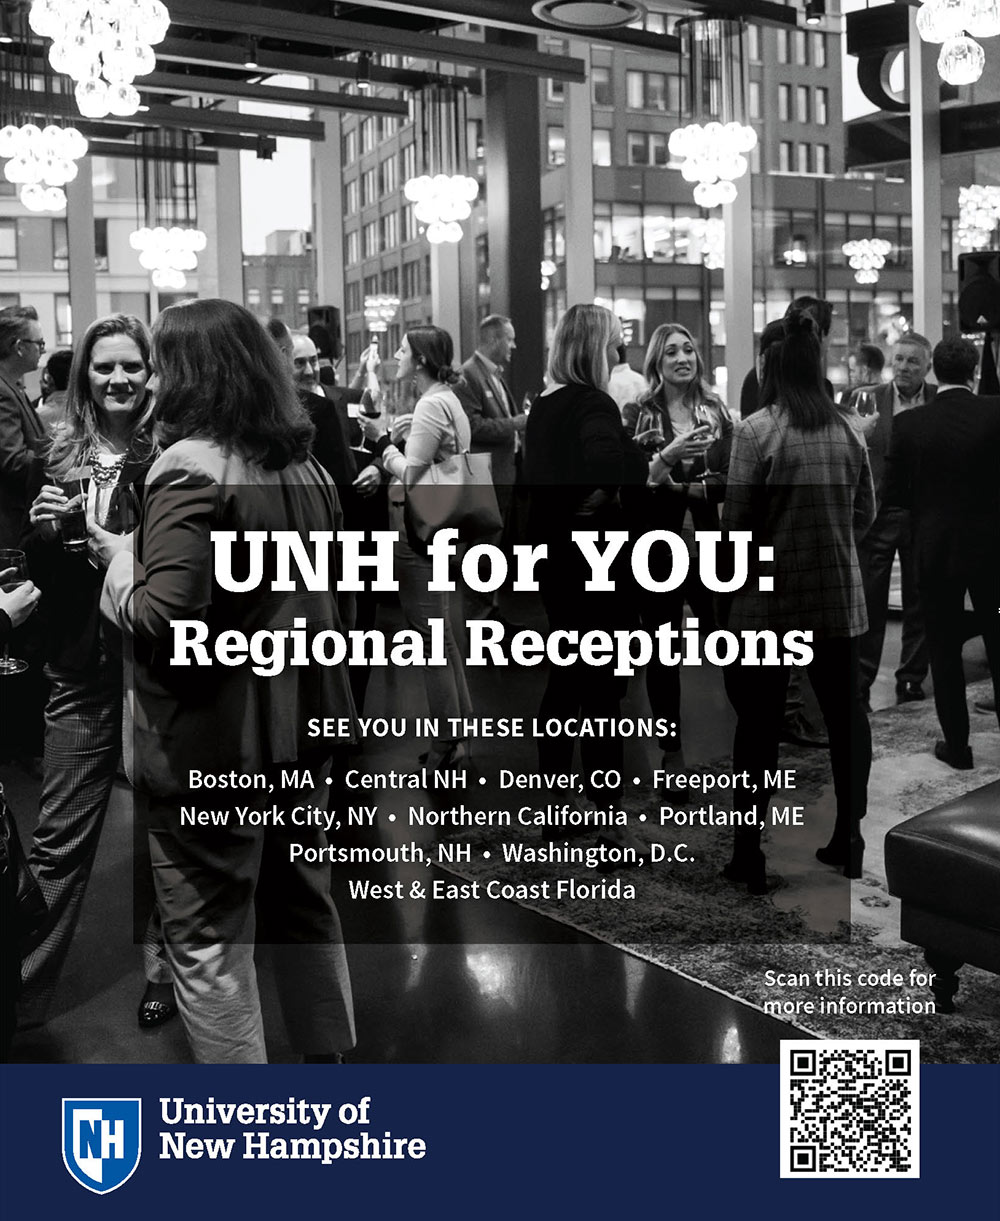 UNH for YOU: Regional Receptions Advertisement